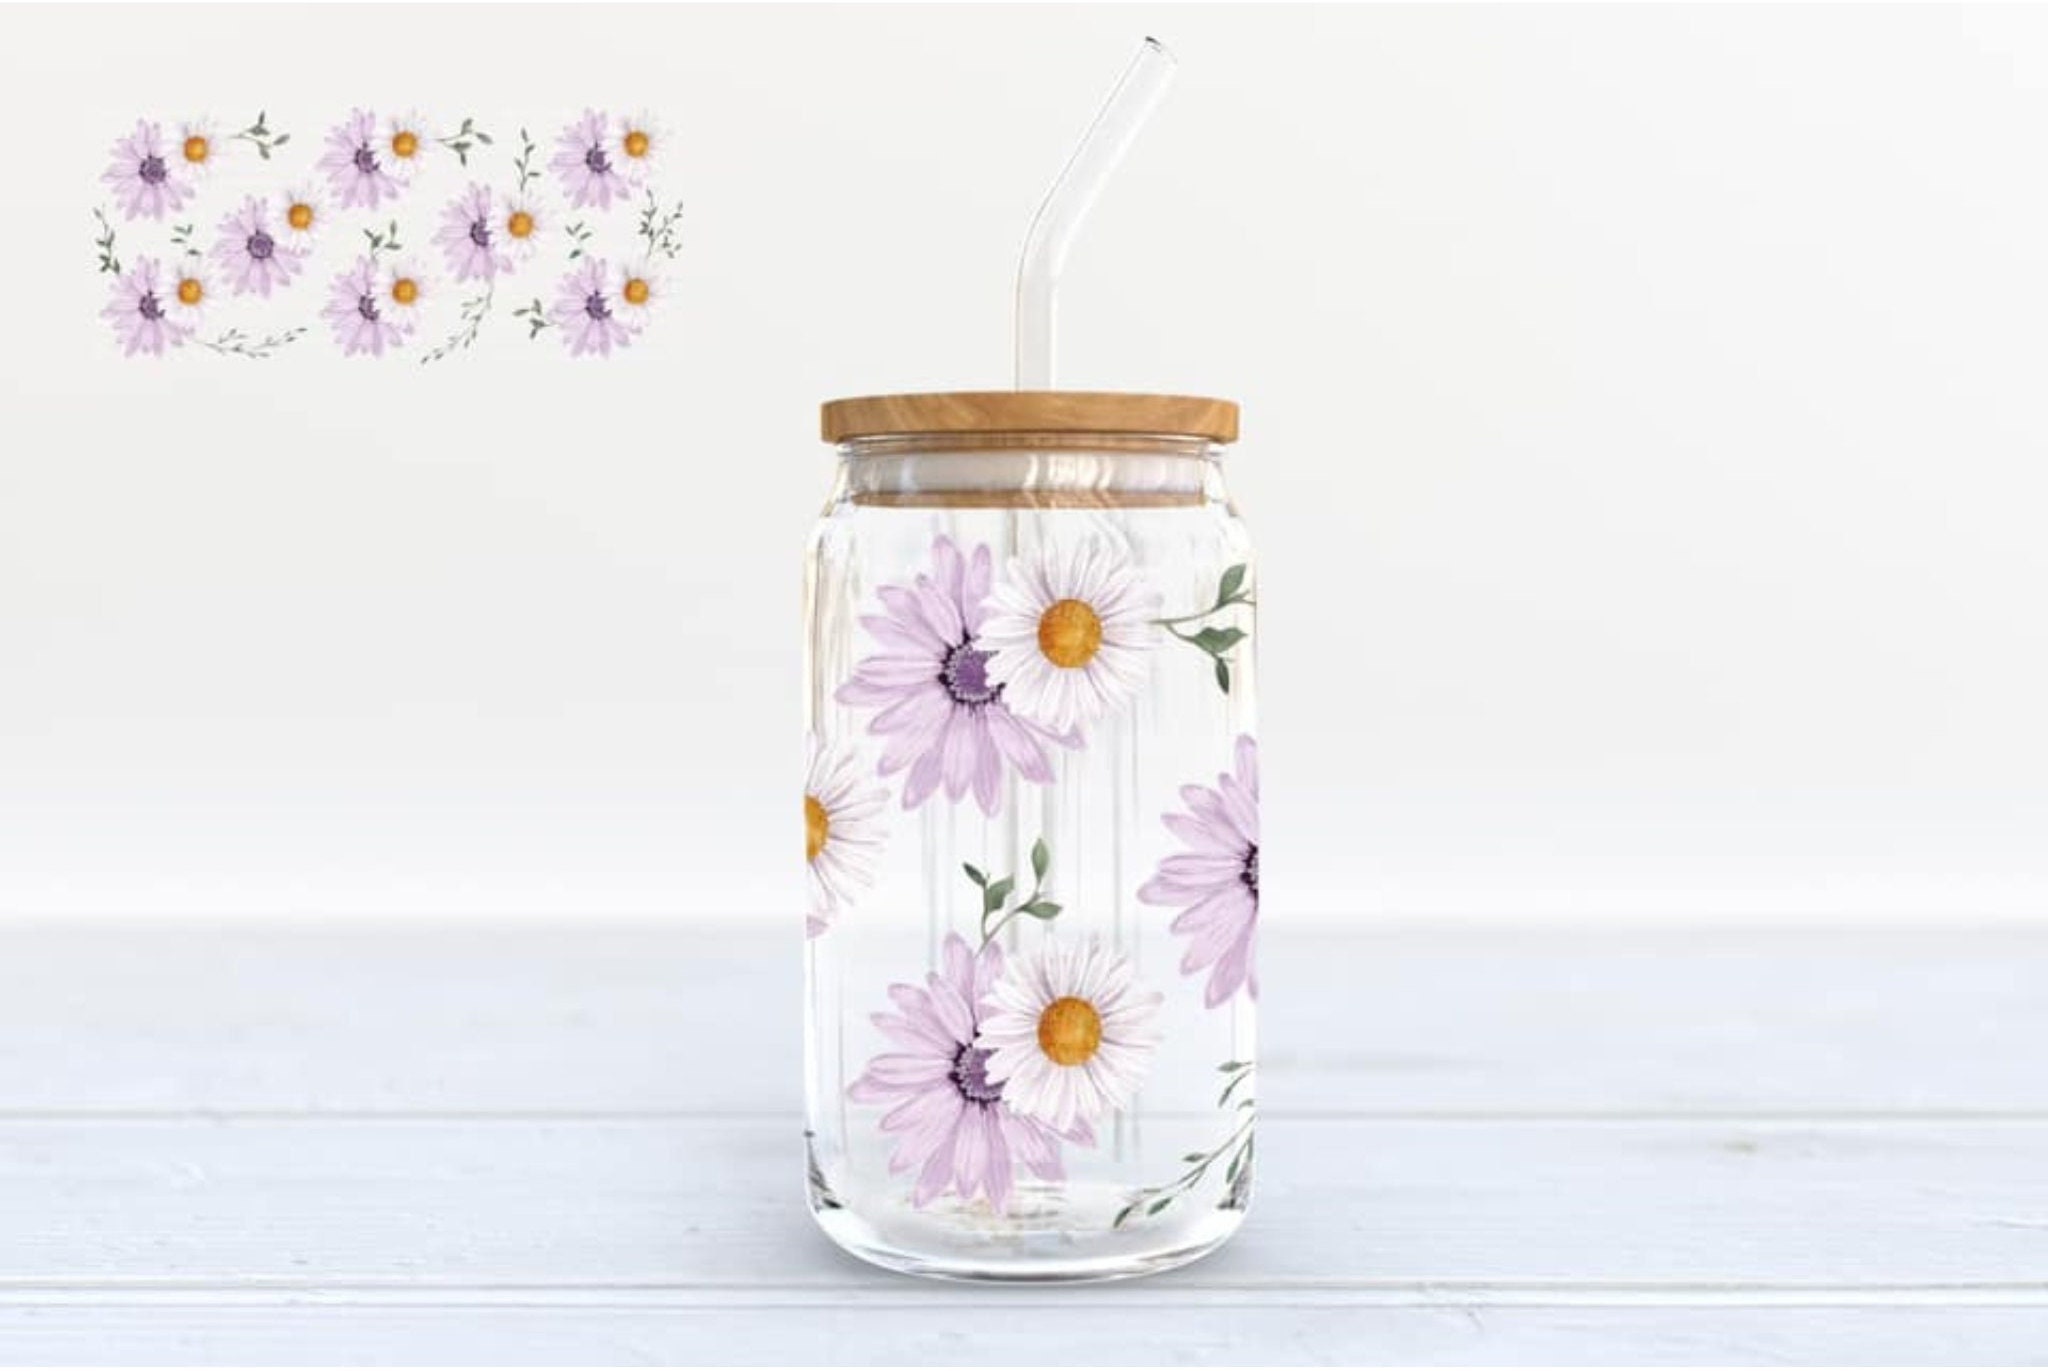 Rainbow Unbreakable Split Glass UV Color Sublimation Tumbler With Bamboo Lid  And Reusable Straw 12oz/16oz Clear Drinking Unbreakable Split Glasses From  Hc_network, $3.2